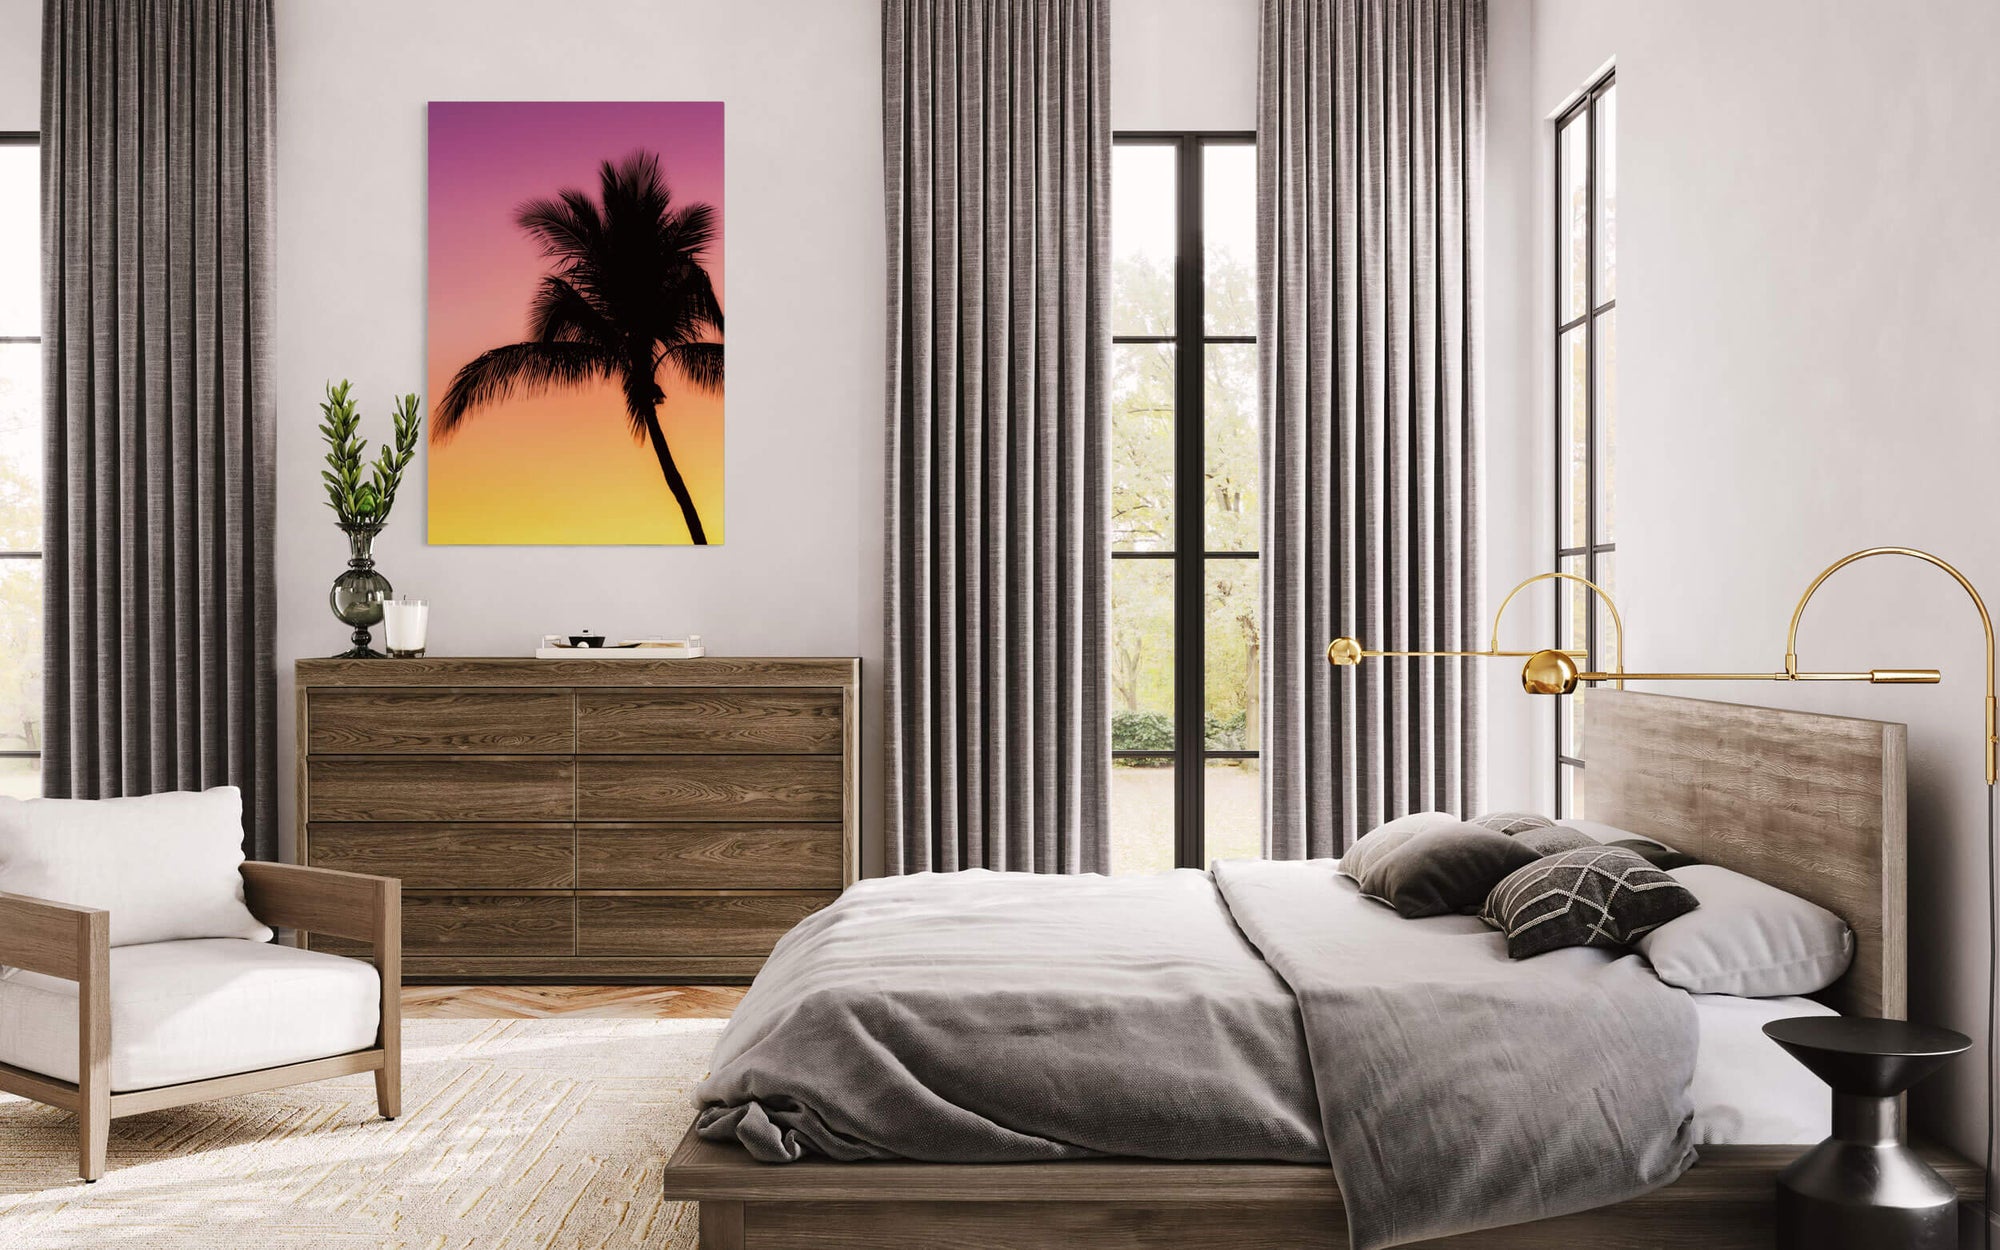 A Key West sunset picture with a palm tree hangs in a bedroom.